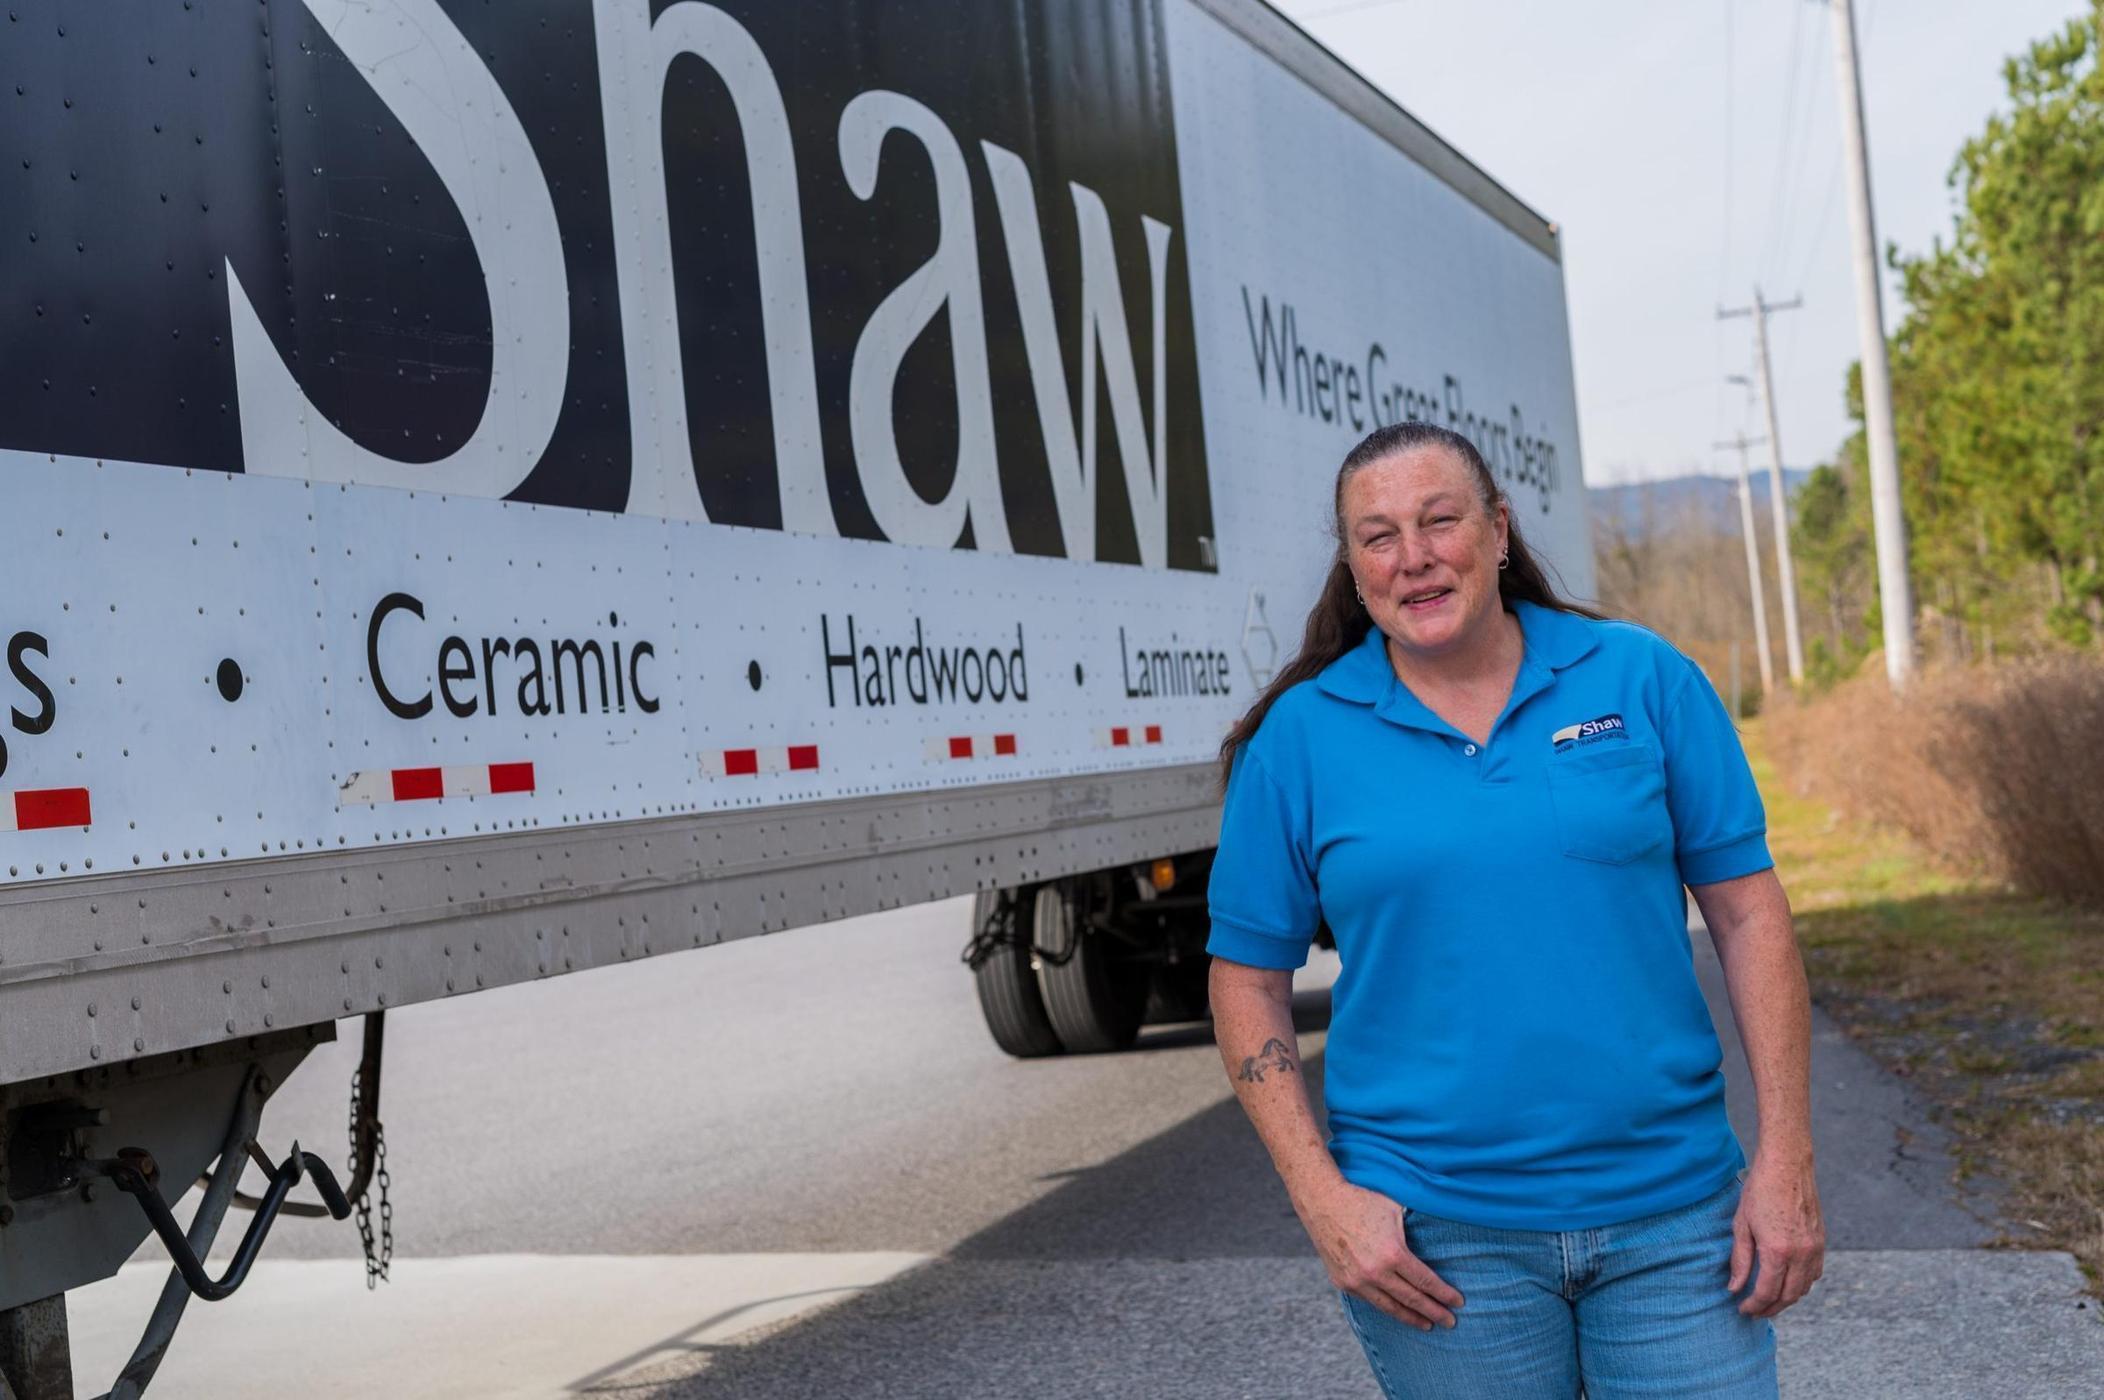 Female truck driver standing on the side of a Shaw semi truck